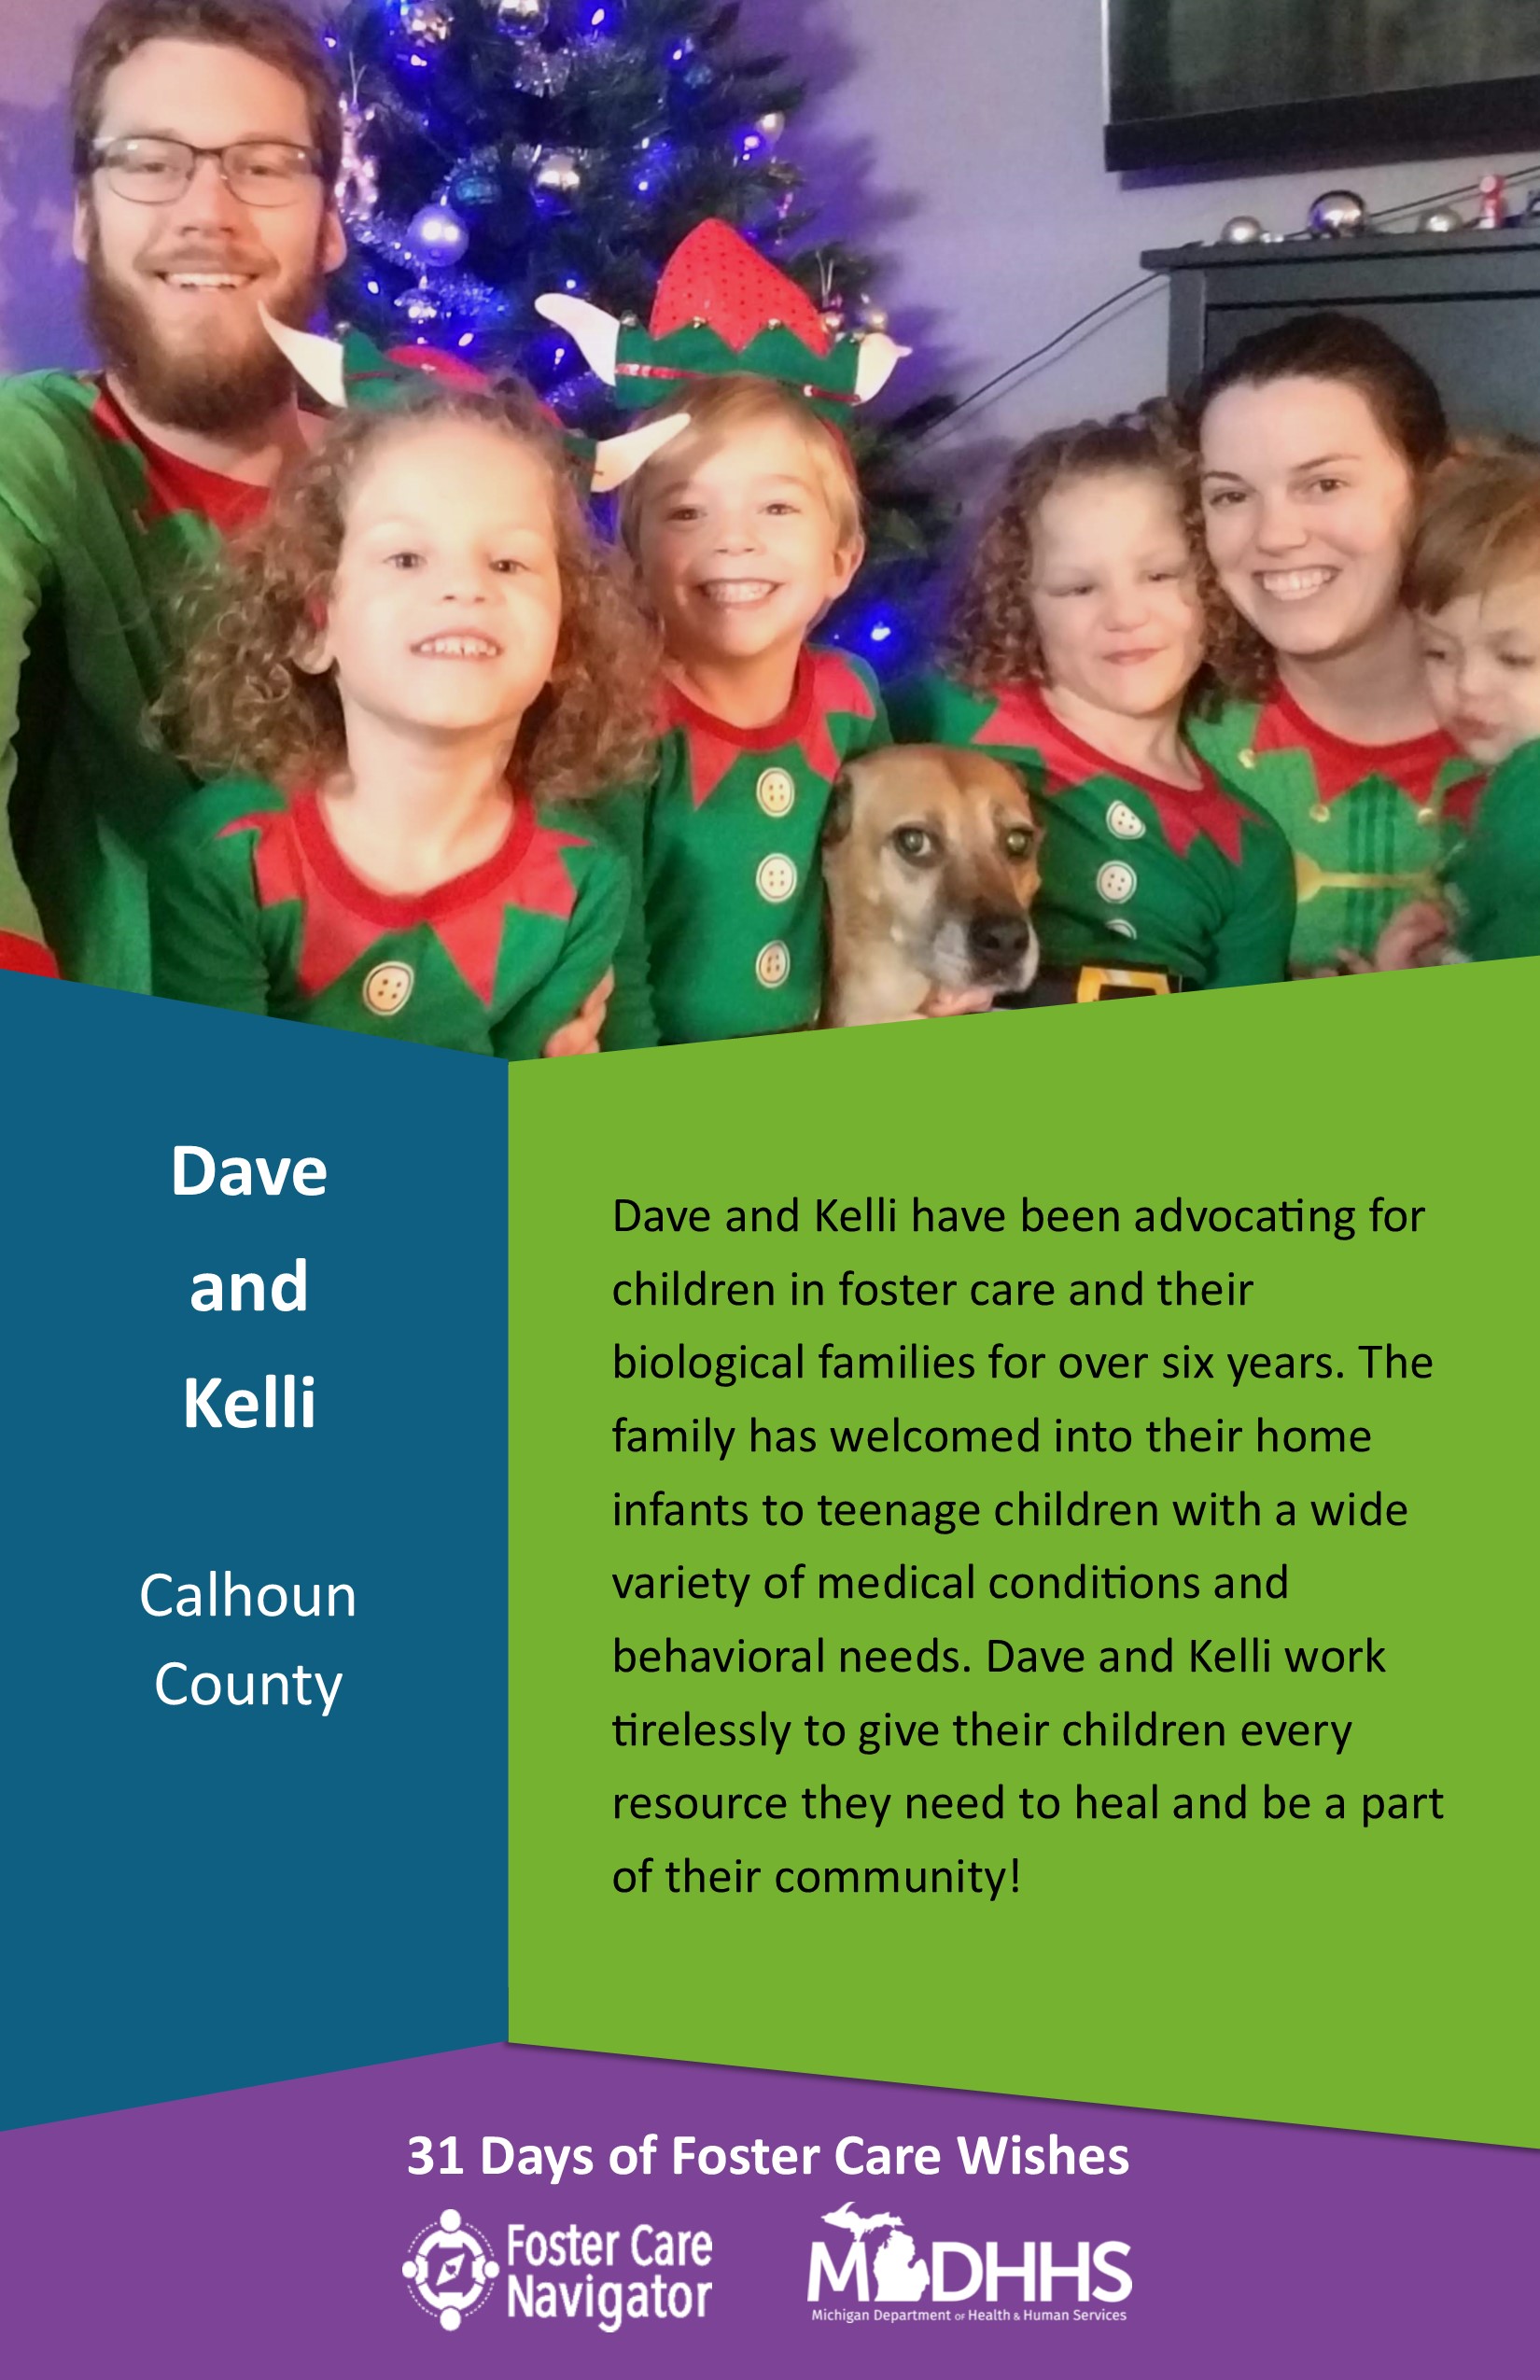 This full page feature includes all of the text listed in the body of this blog post as well as a photo of Dave and Kelli. The background is blue on the left, green on the right, and purple at the bottom of the page where the logos are located.